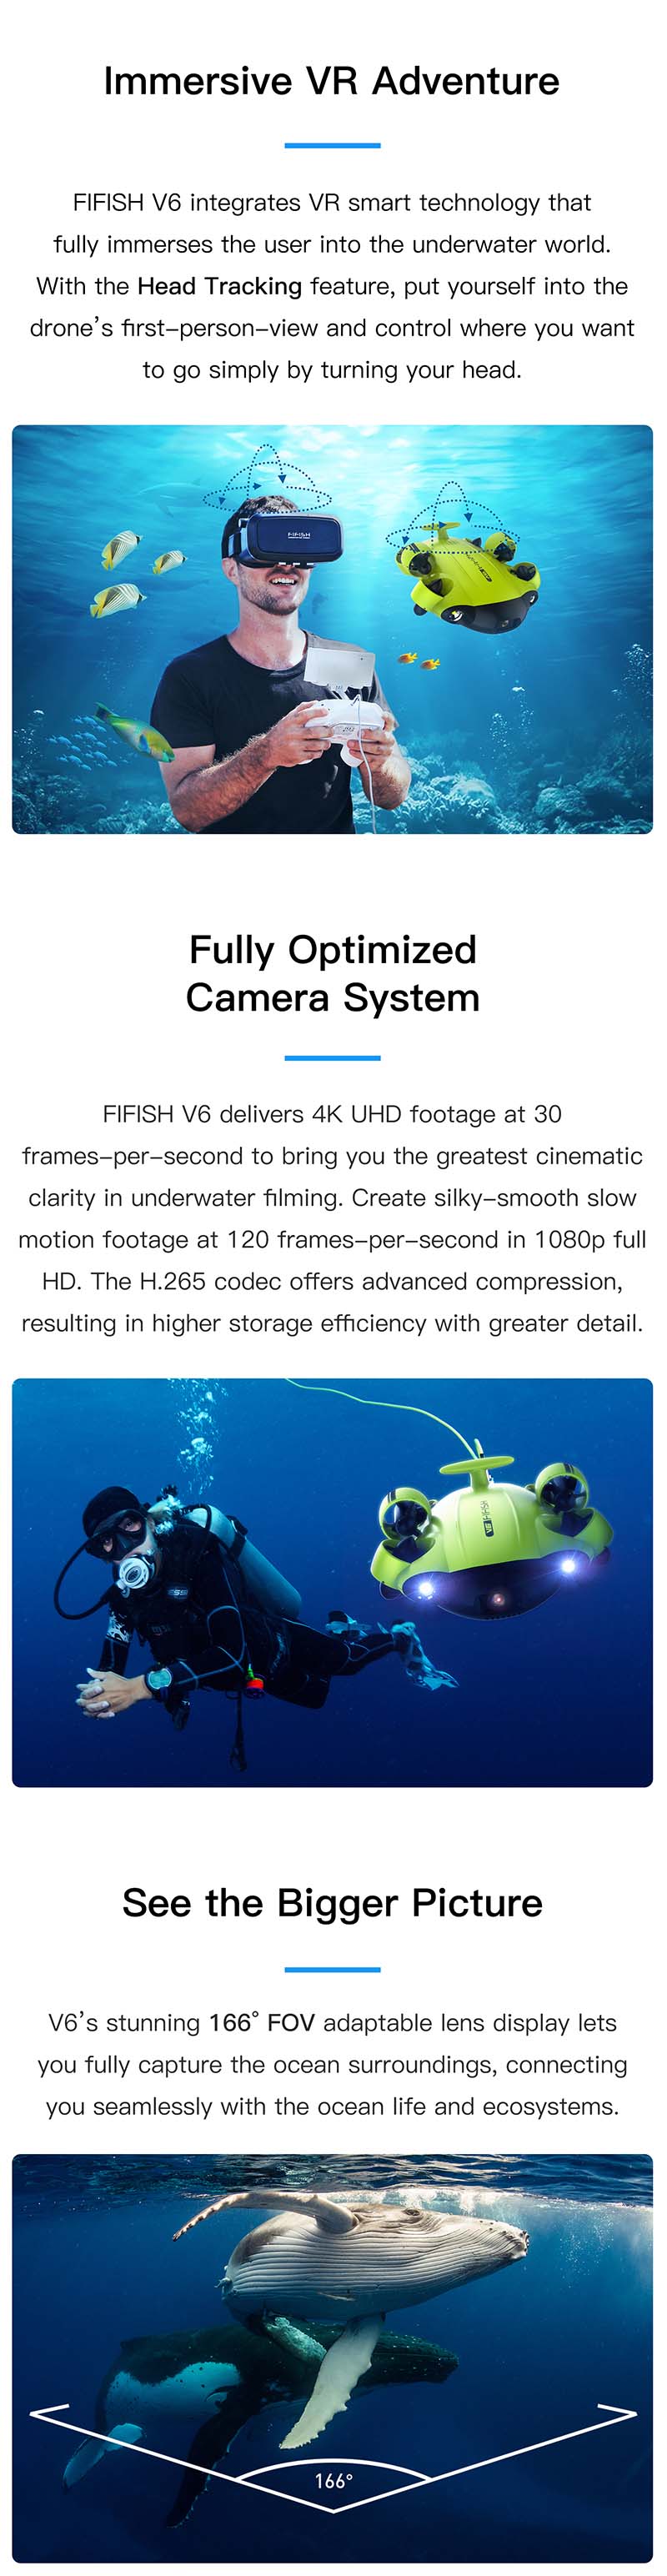 FIFISH-V6-Underwater-Robot-with-4K-UHD-Camera-4-Hours-Working-Time-Head-Tracking-Immersive-VR-Contro-1765757-4